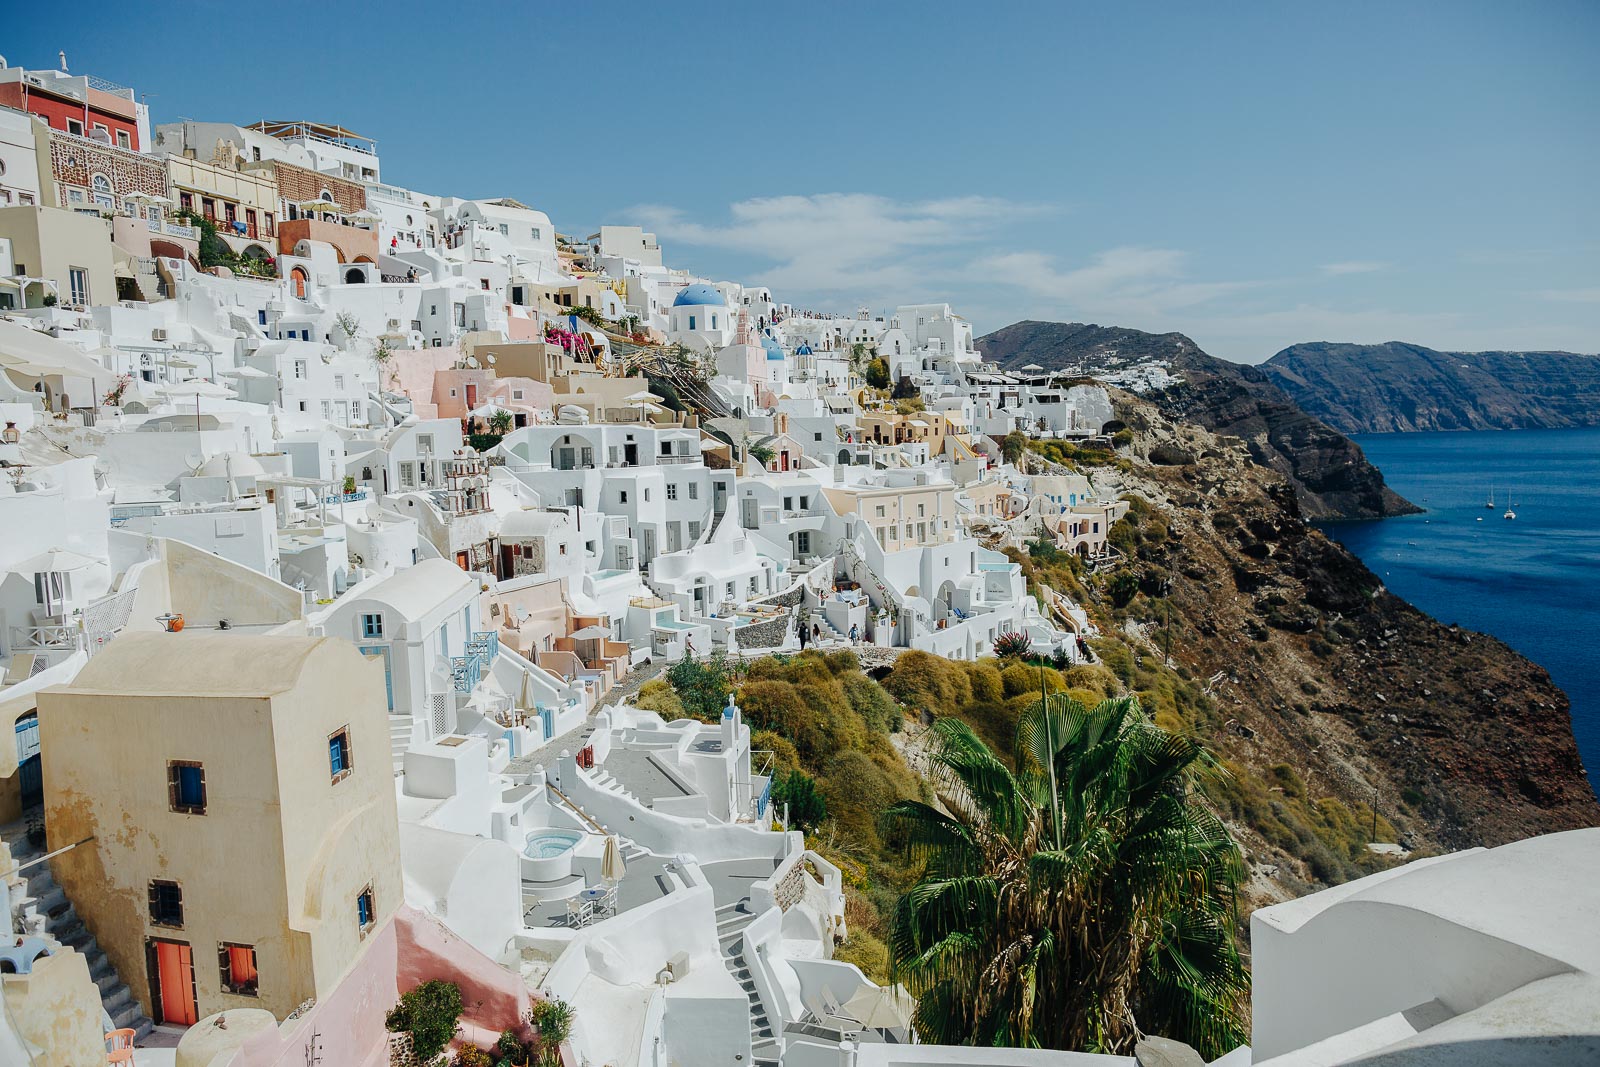 The most beautiful places in Santorini